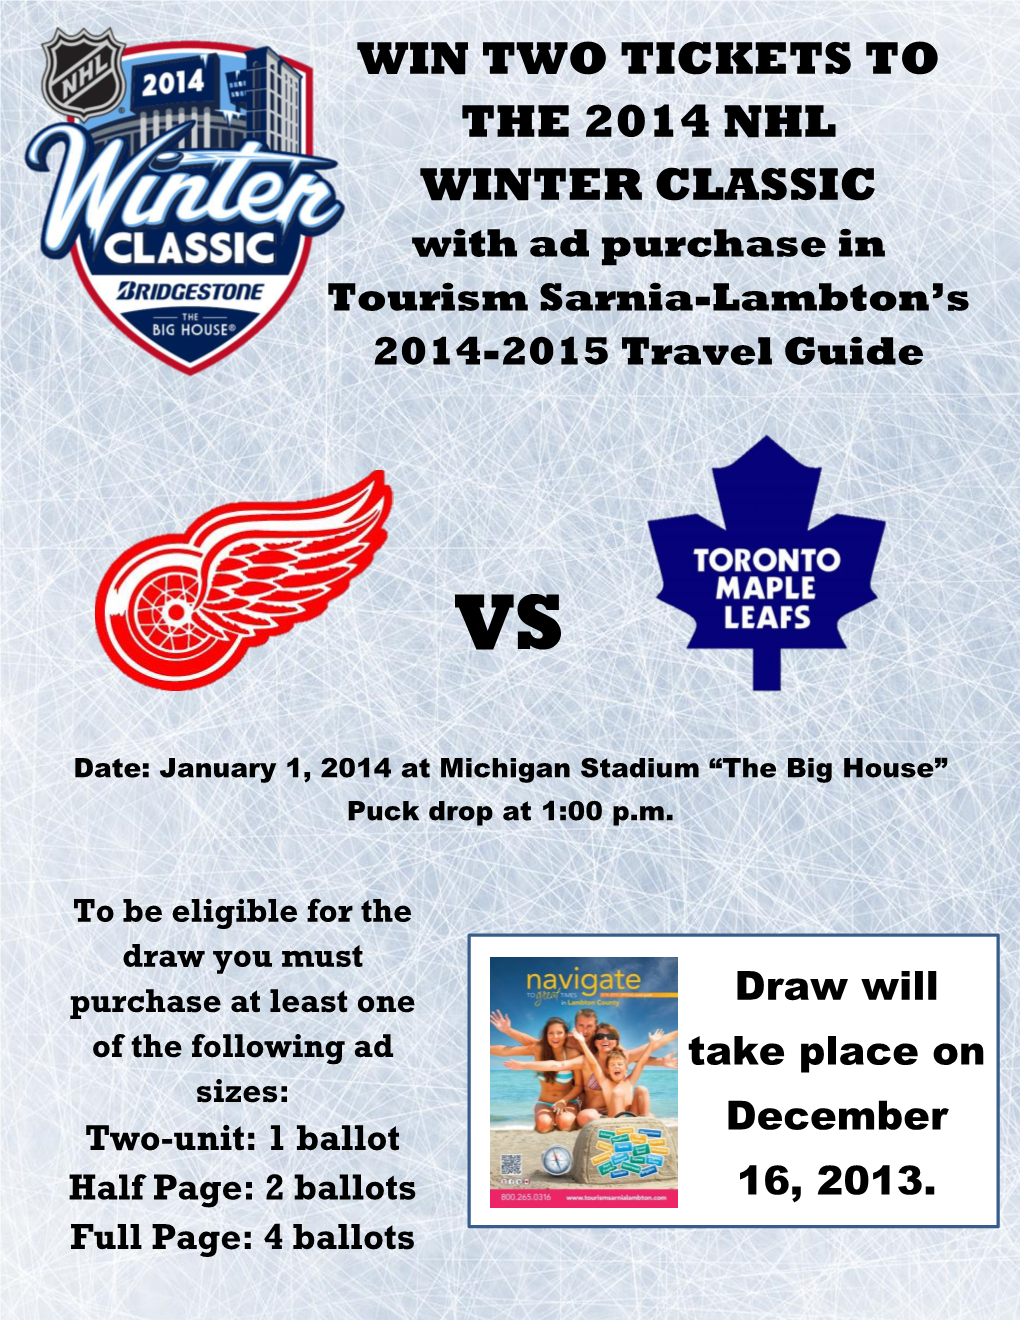 Win Two Tickets to the 2014 Nhl Winter Classic